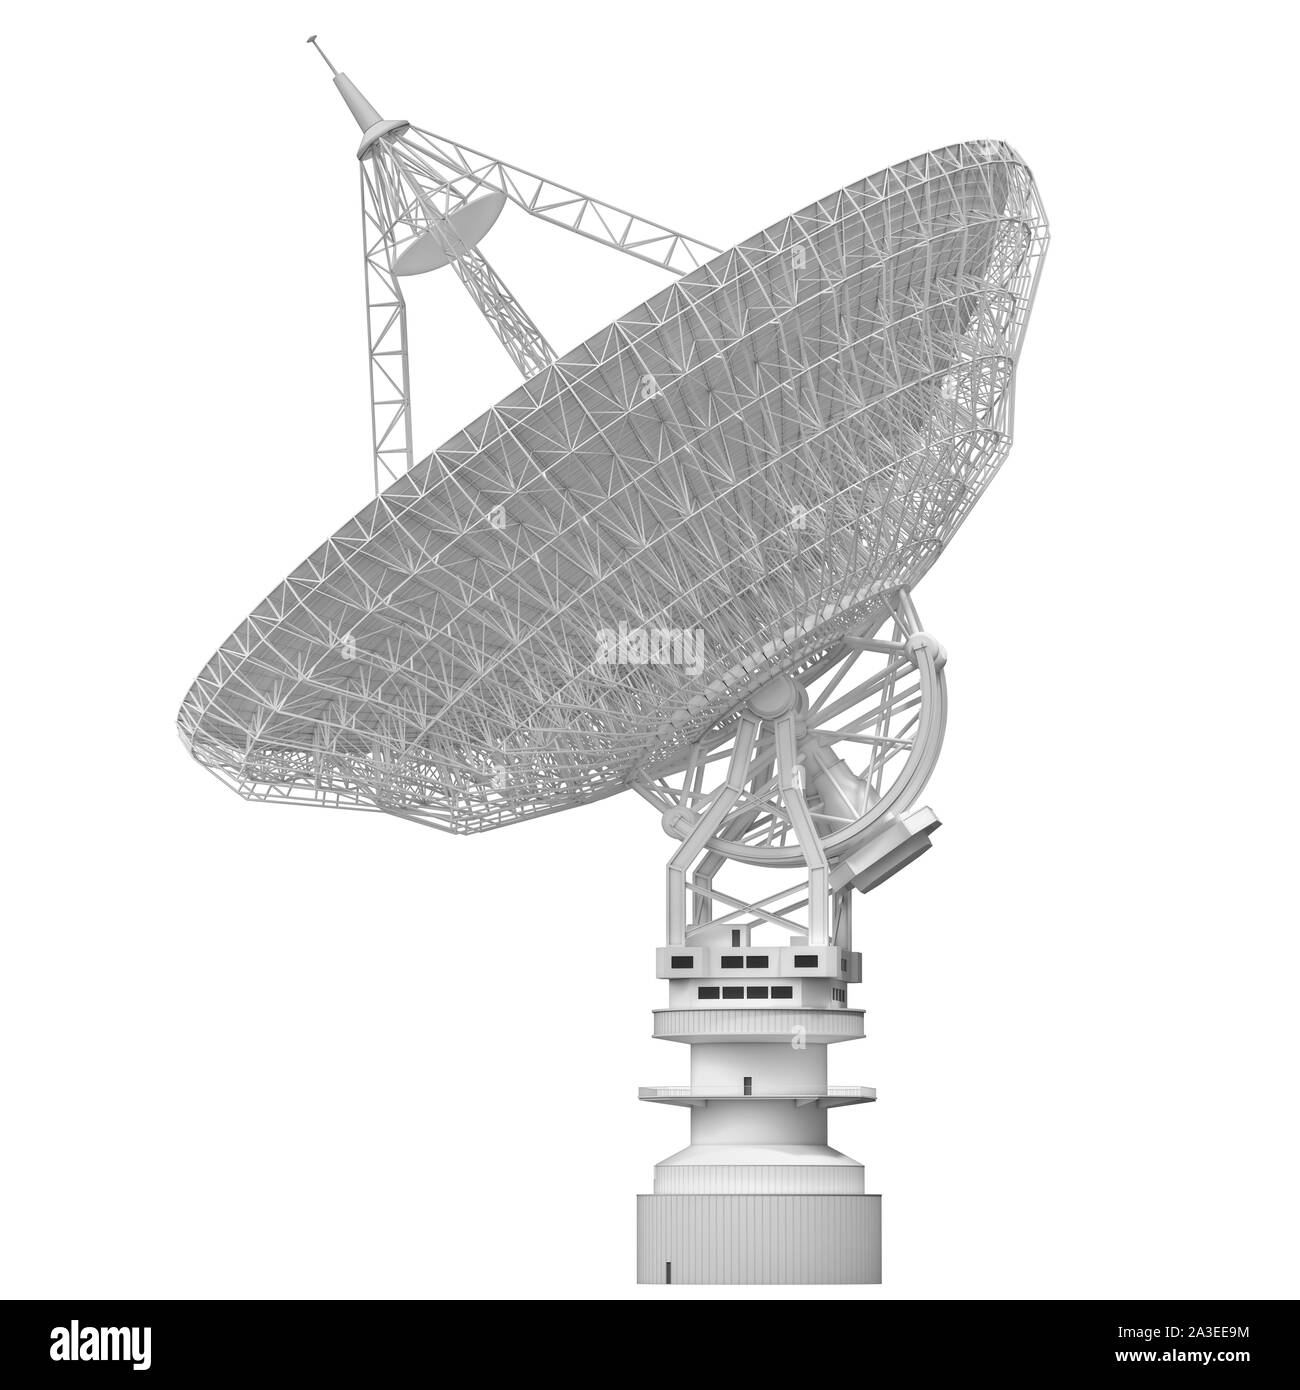 Huge satellite antenna dish for communication and signal reception out of the planet Earth. 3D illustration over white with clipping path included. Stock Photo